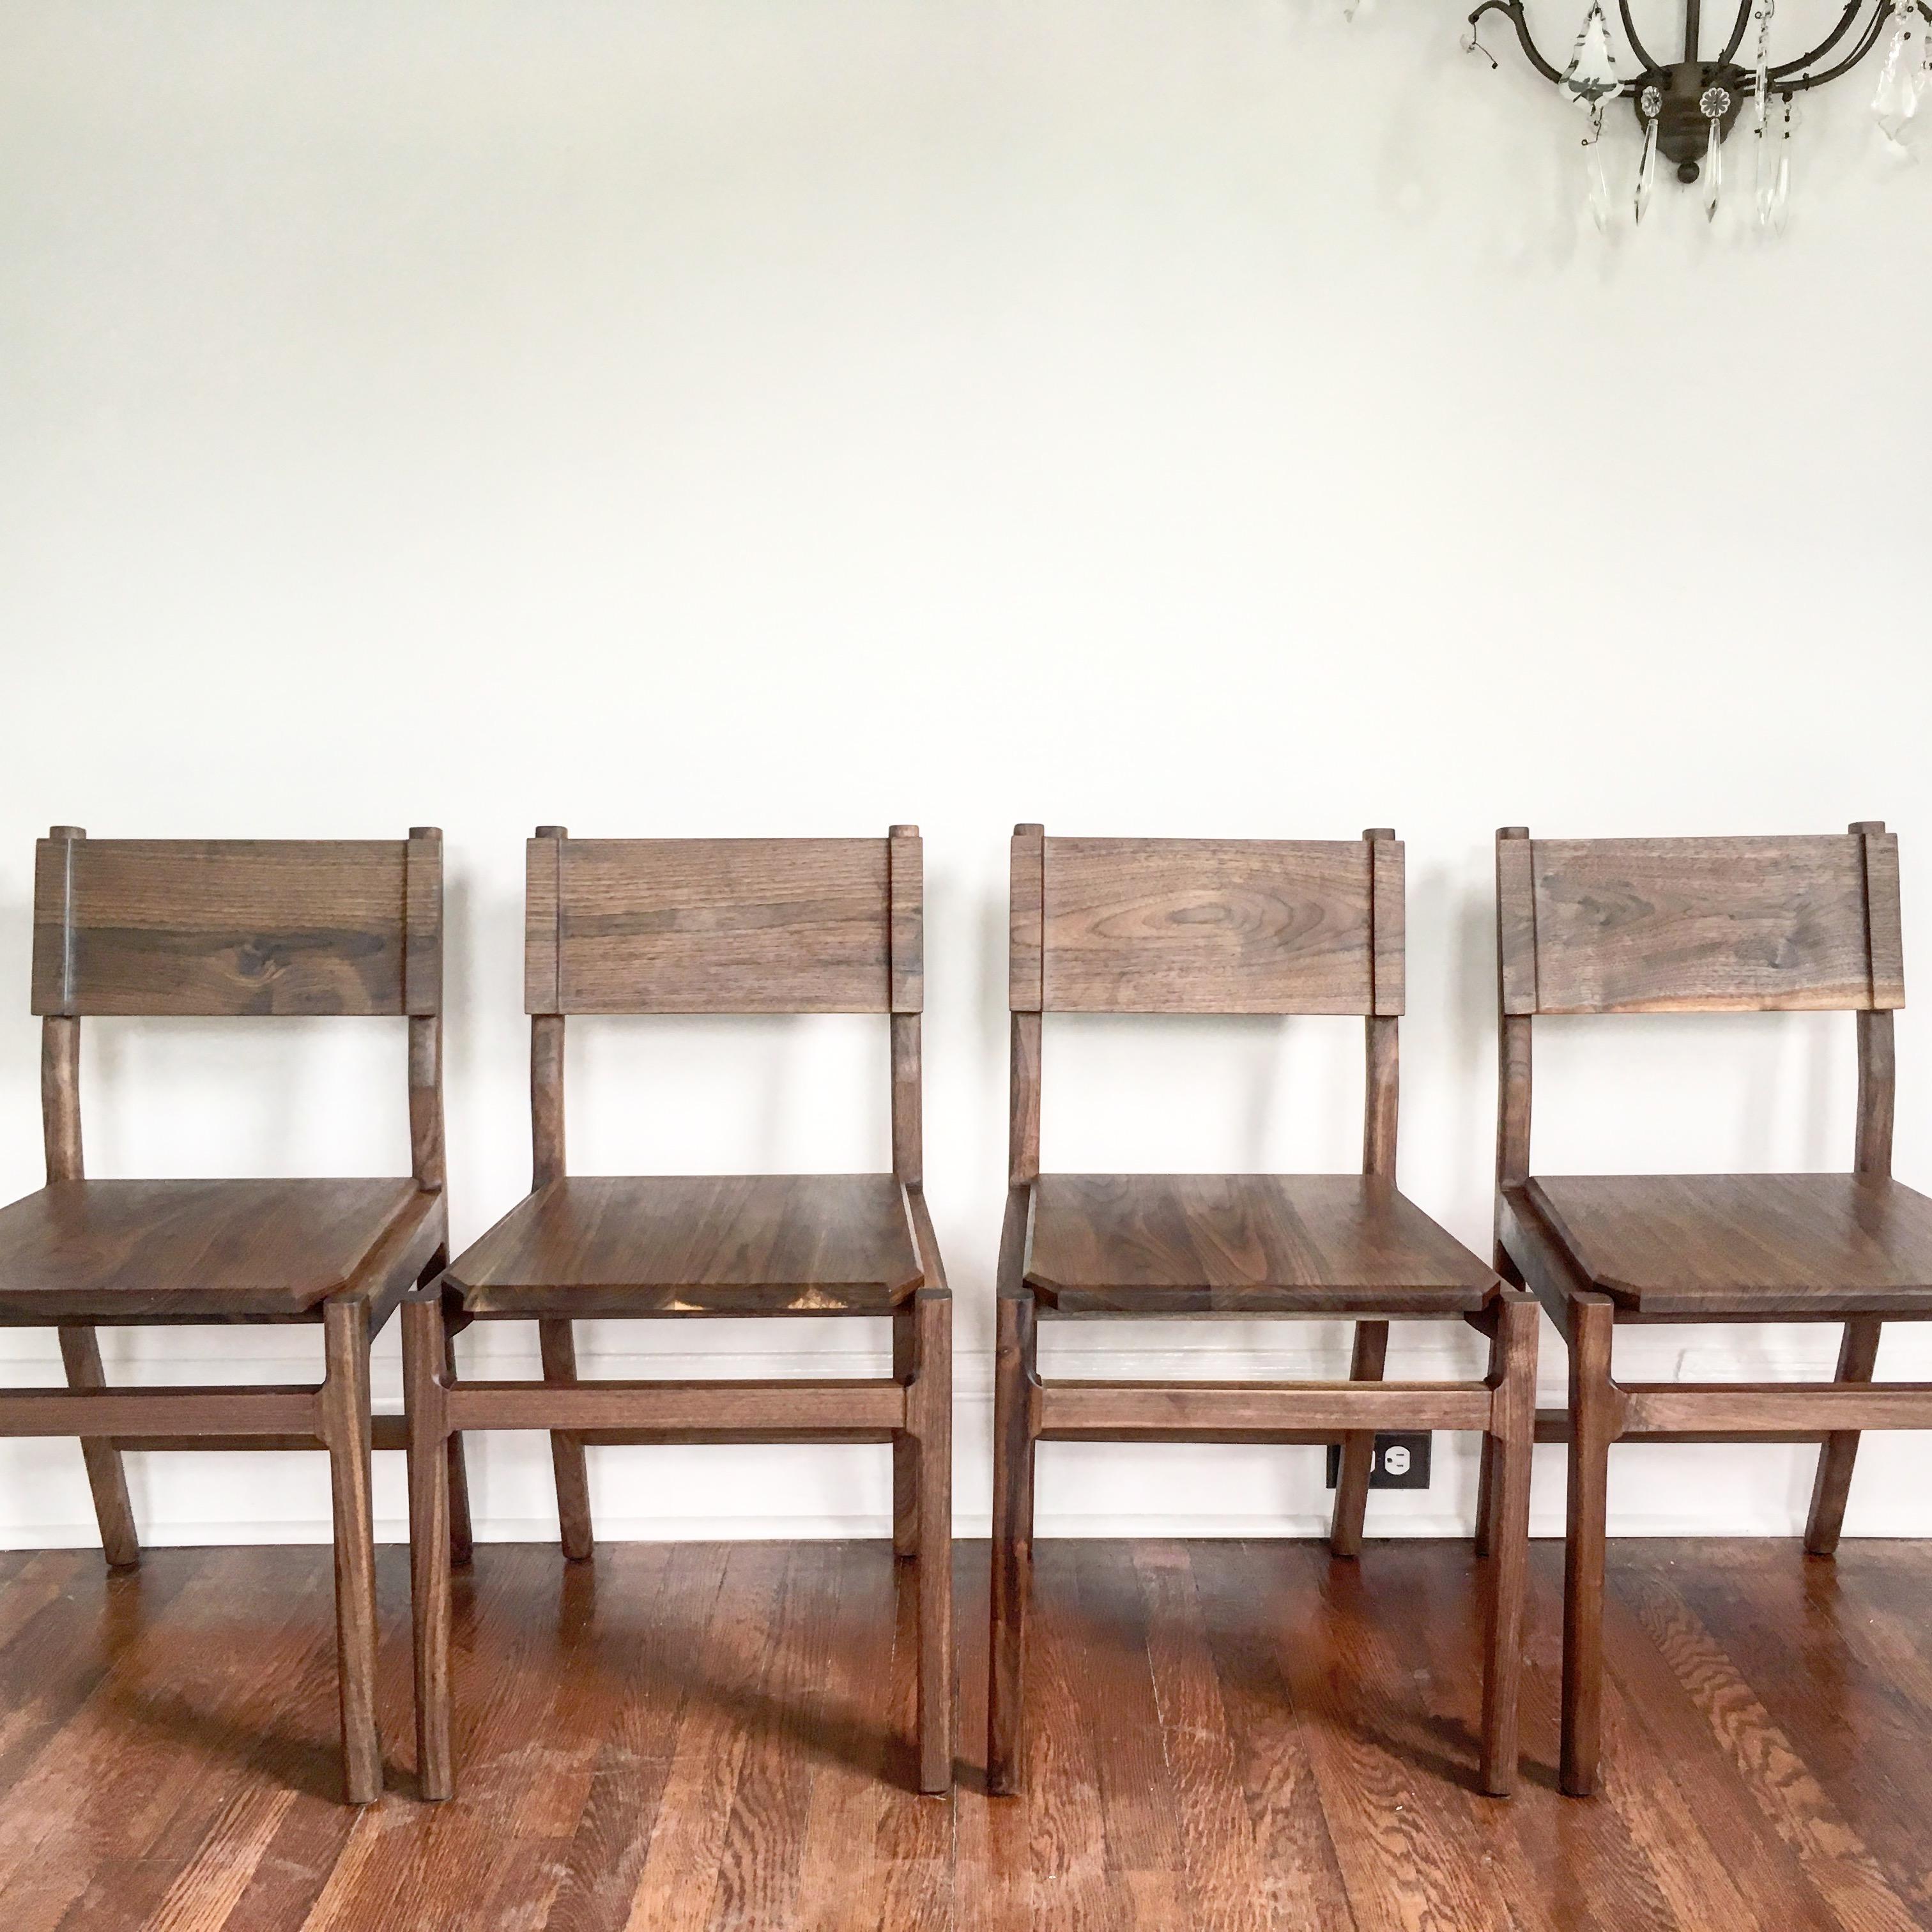 Hand-Crafted Black Walnut Hewitt Wood Dining Chair by New York Heartwoods For Sale